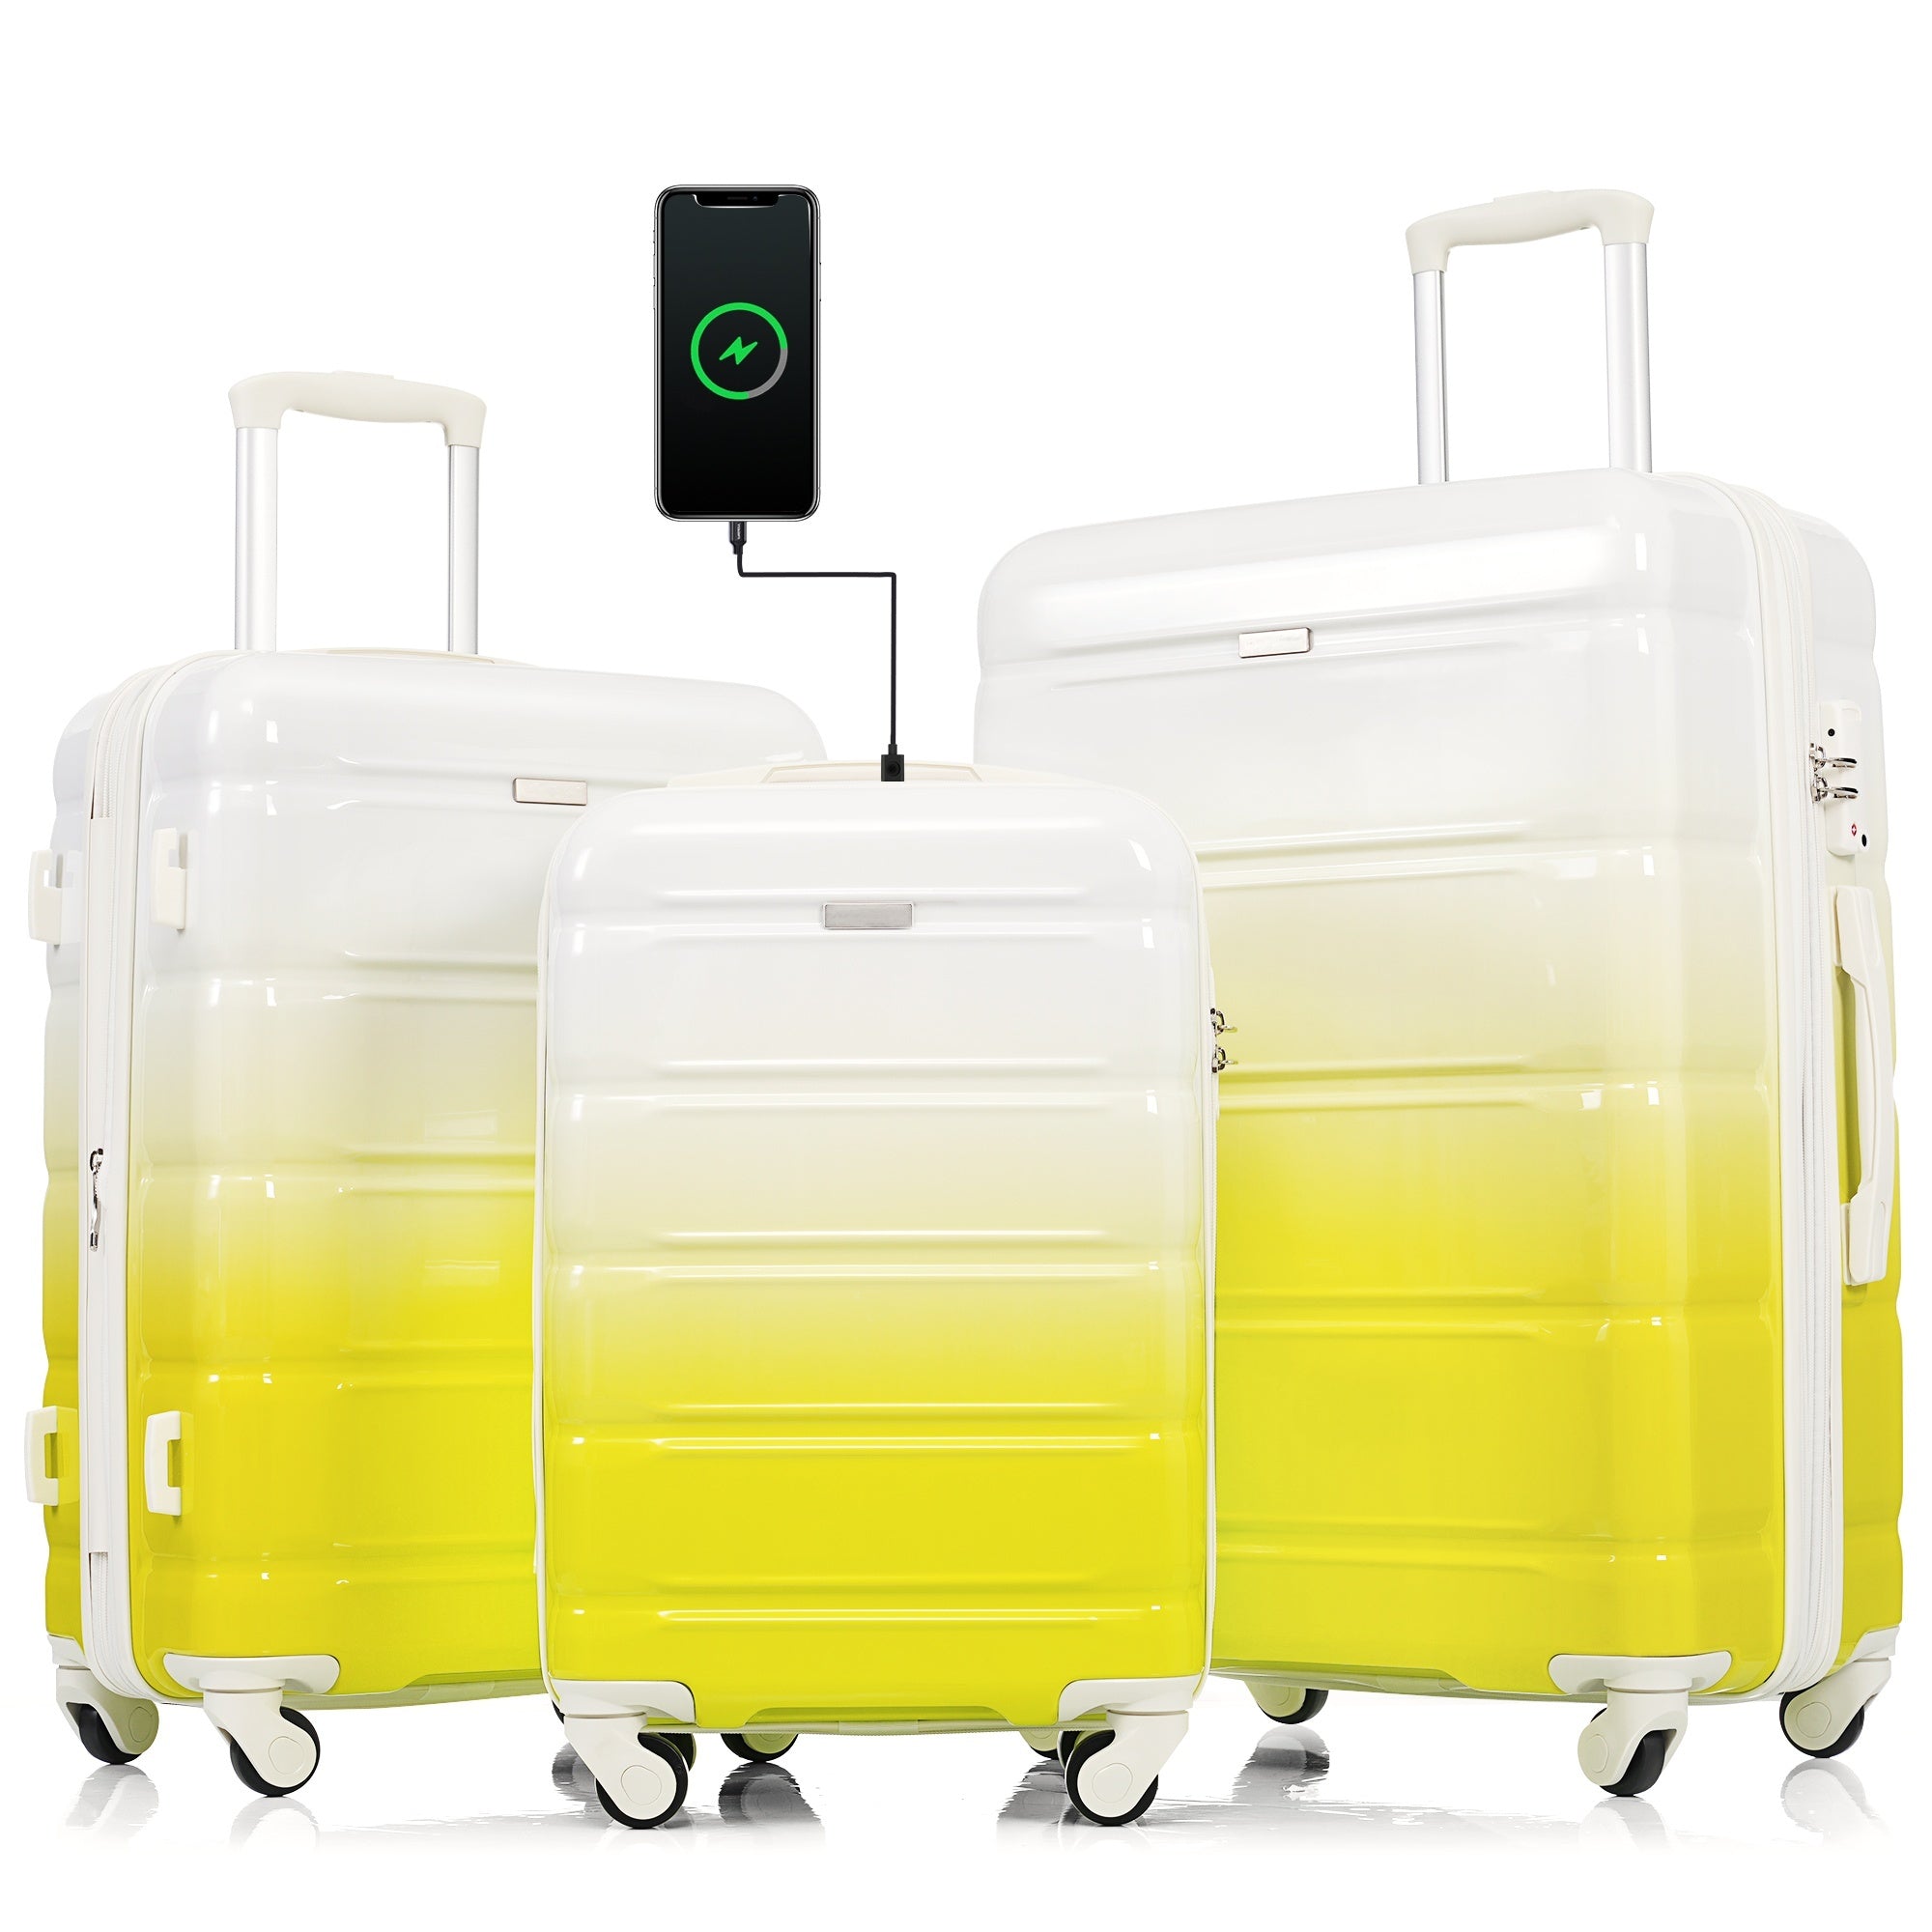 Luggage Set Of 3, 20 Inch With Usb Port, Airline